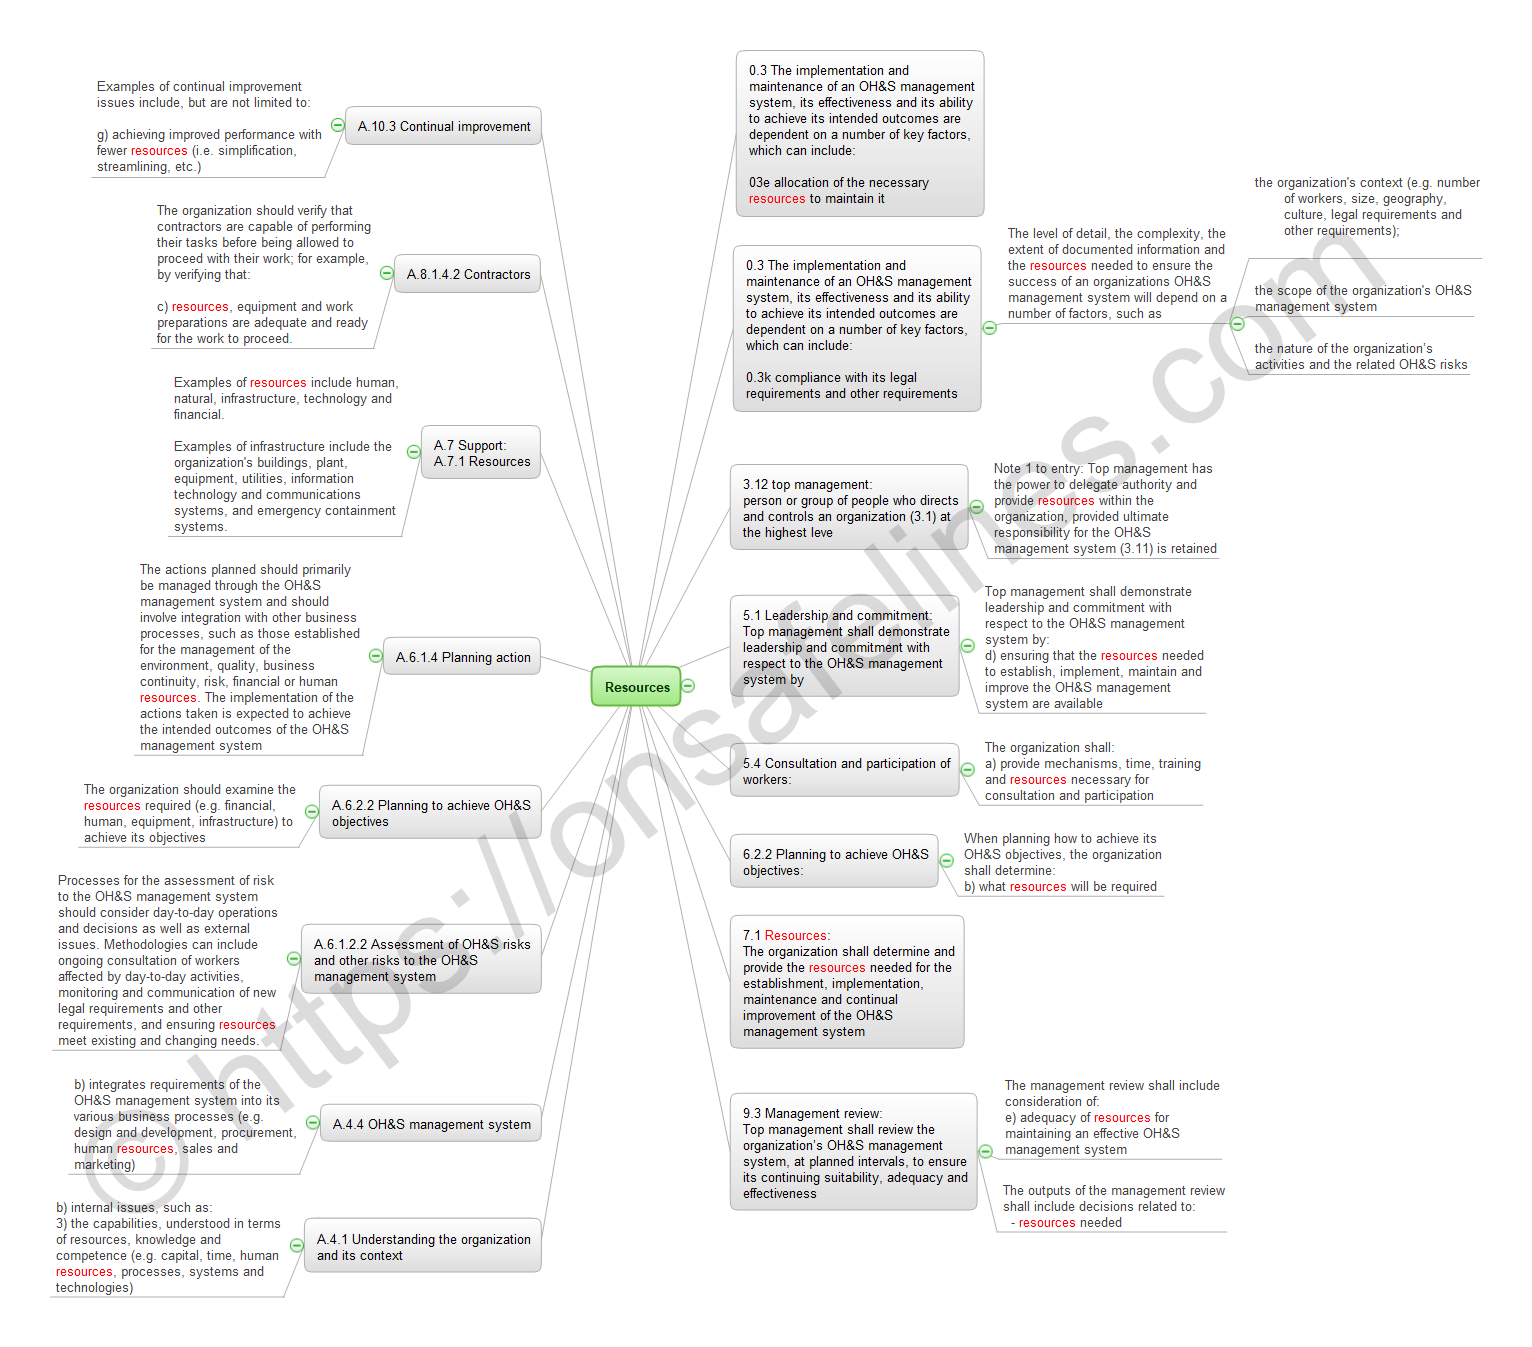 ISO 45001 2018 7.1 Resources Mind Map